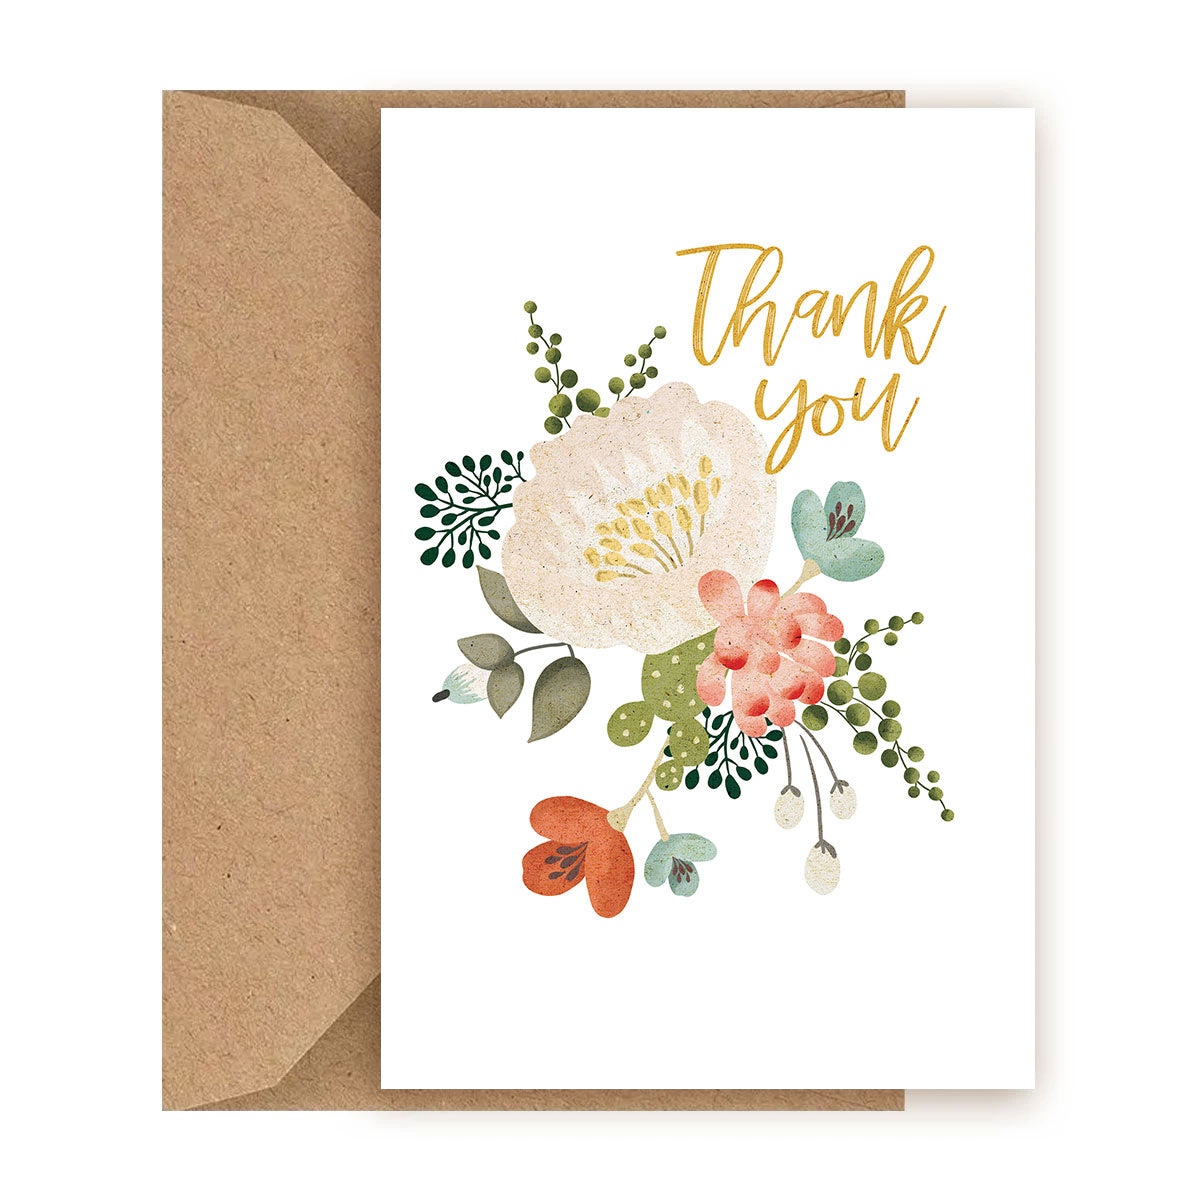 Thank you card for employee, Employee Appreciation Cards for sale, Corporate succulent gift with thank you card, Thank You Live Succulent Gift Box for sale, Succulent thank you cards with kraft envelope, Succulent thank you cards to suit any occasion, Staff Appreciation Card ideas, Thank you note to employee for a job well done, Thank you card for employee appreciation	 	 	 	 	 	 	 	